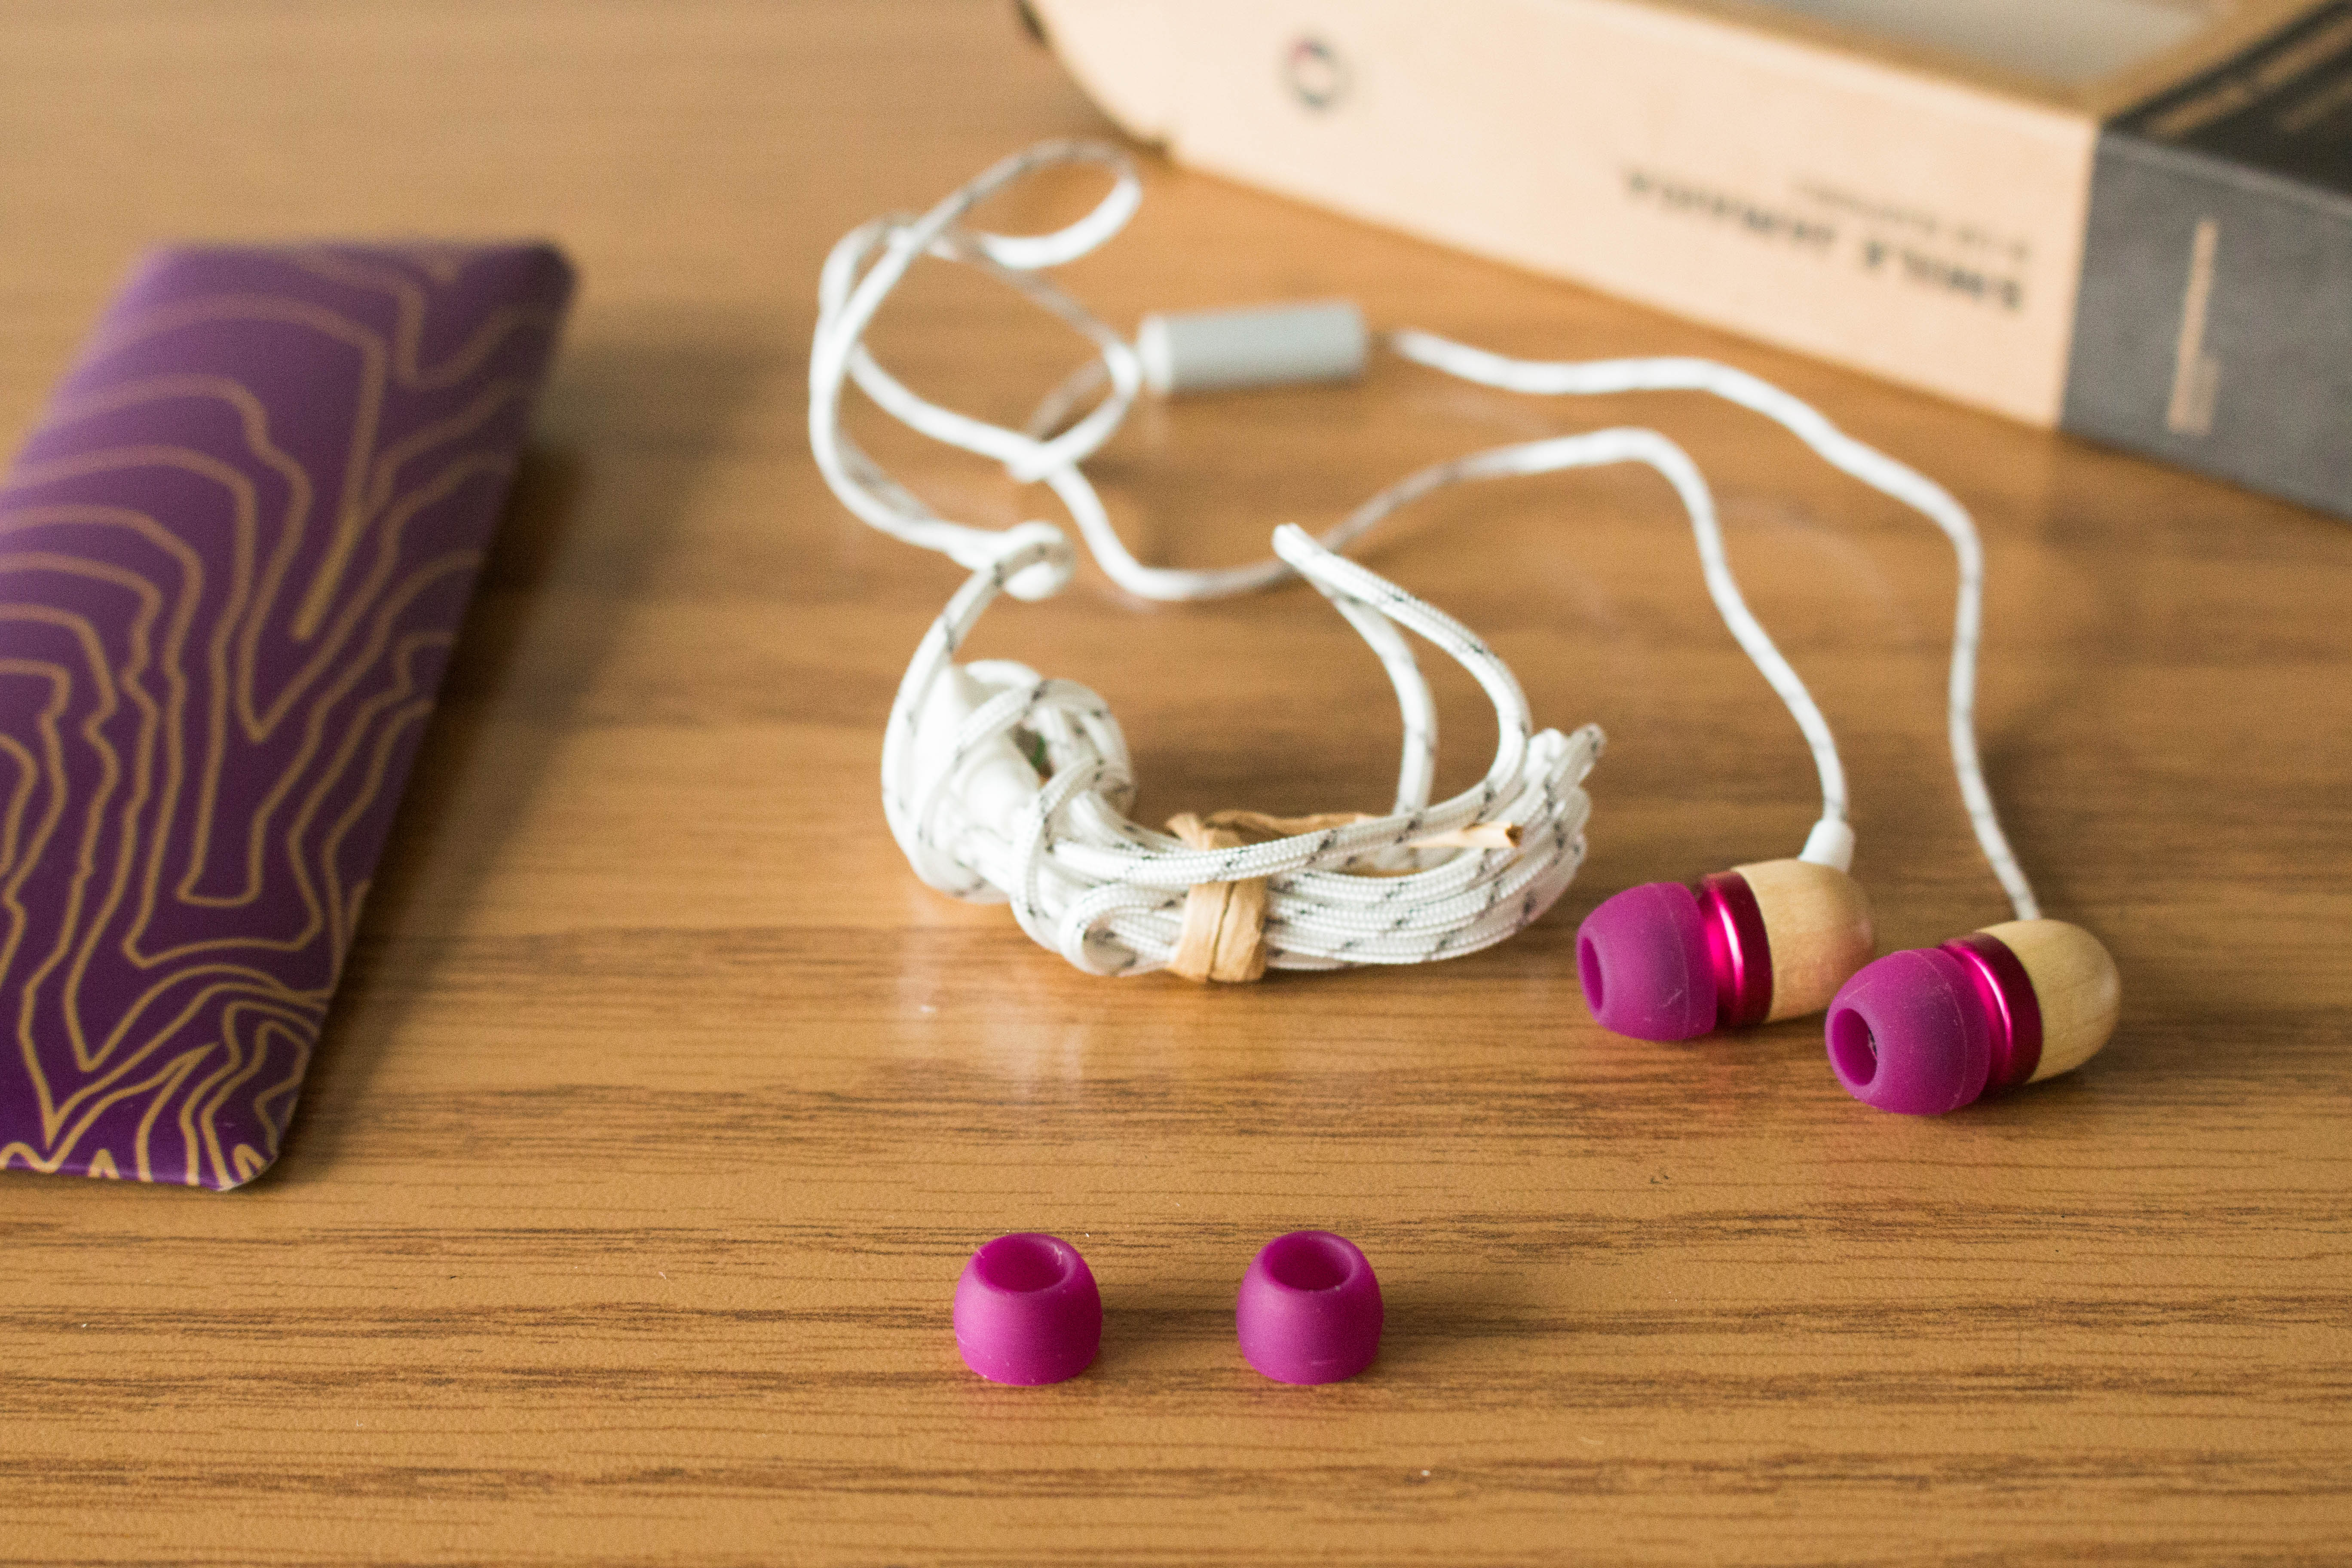 Review: The House of Marley Smile Jamaica Earbuds